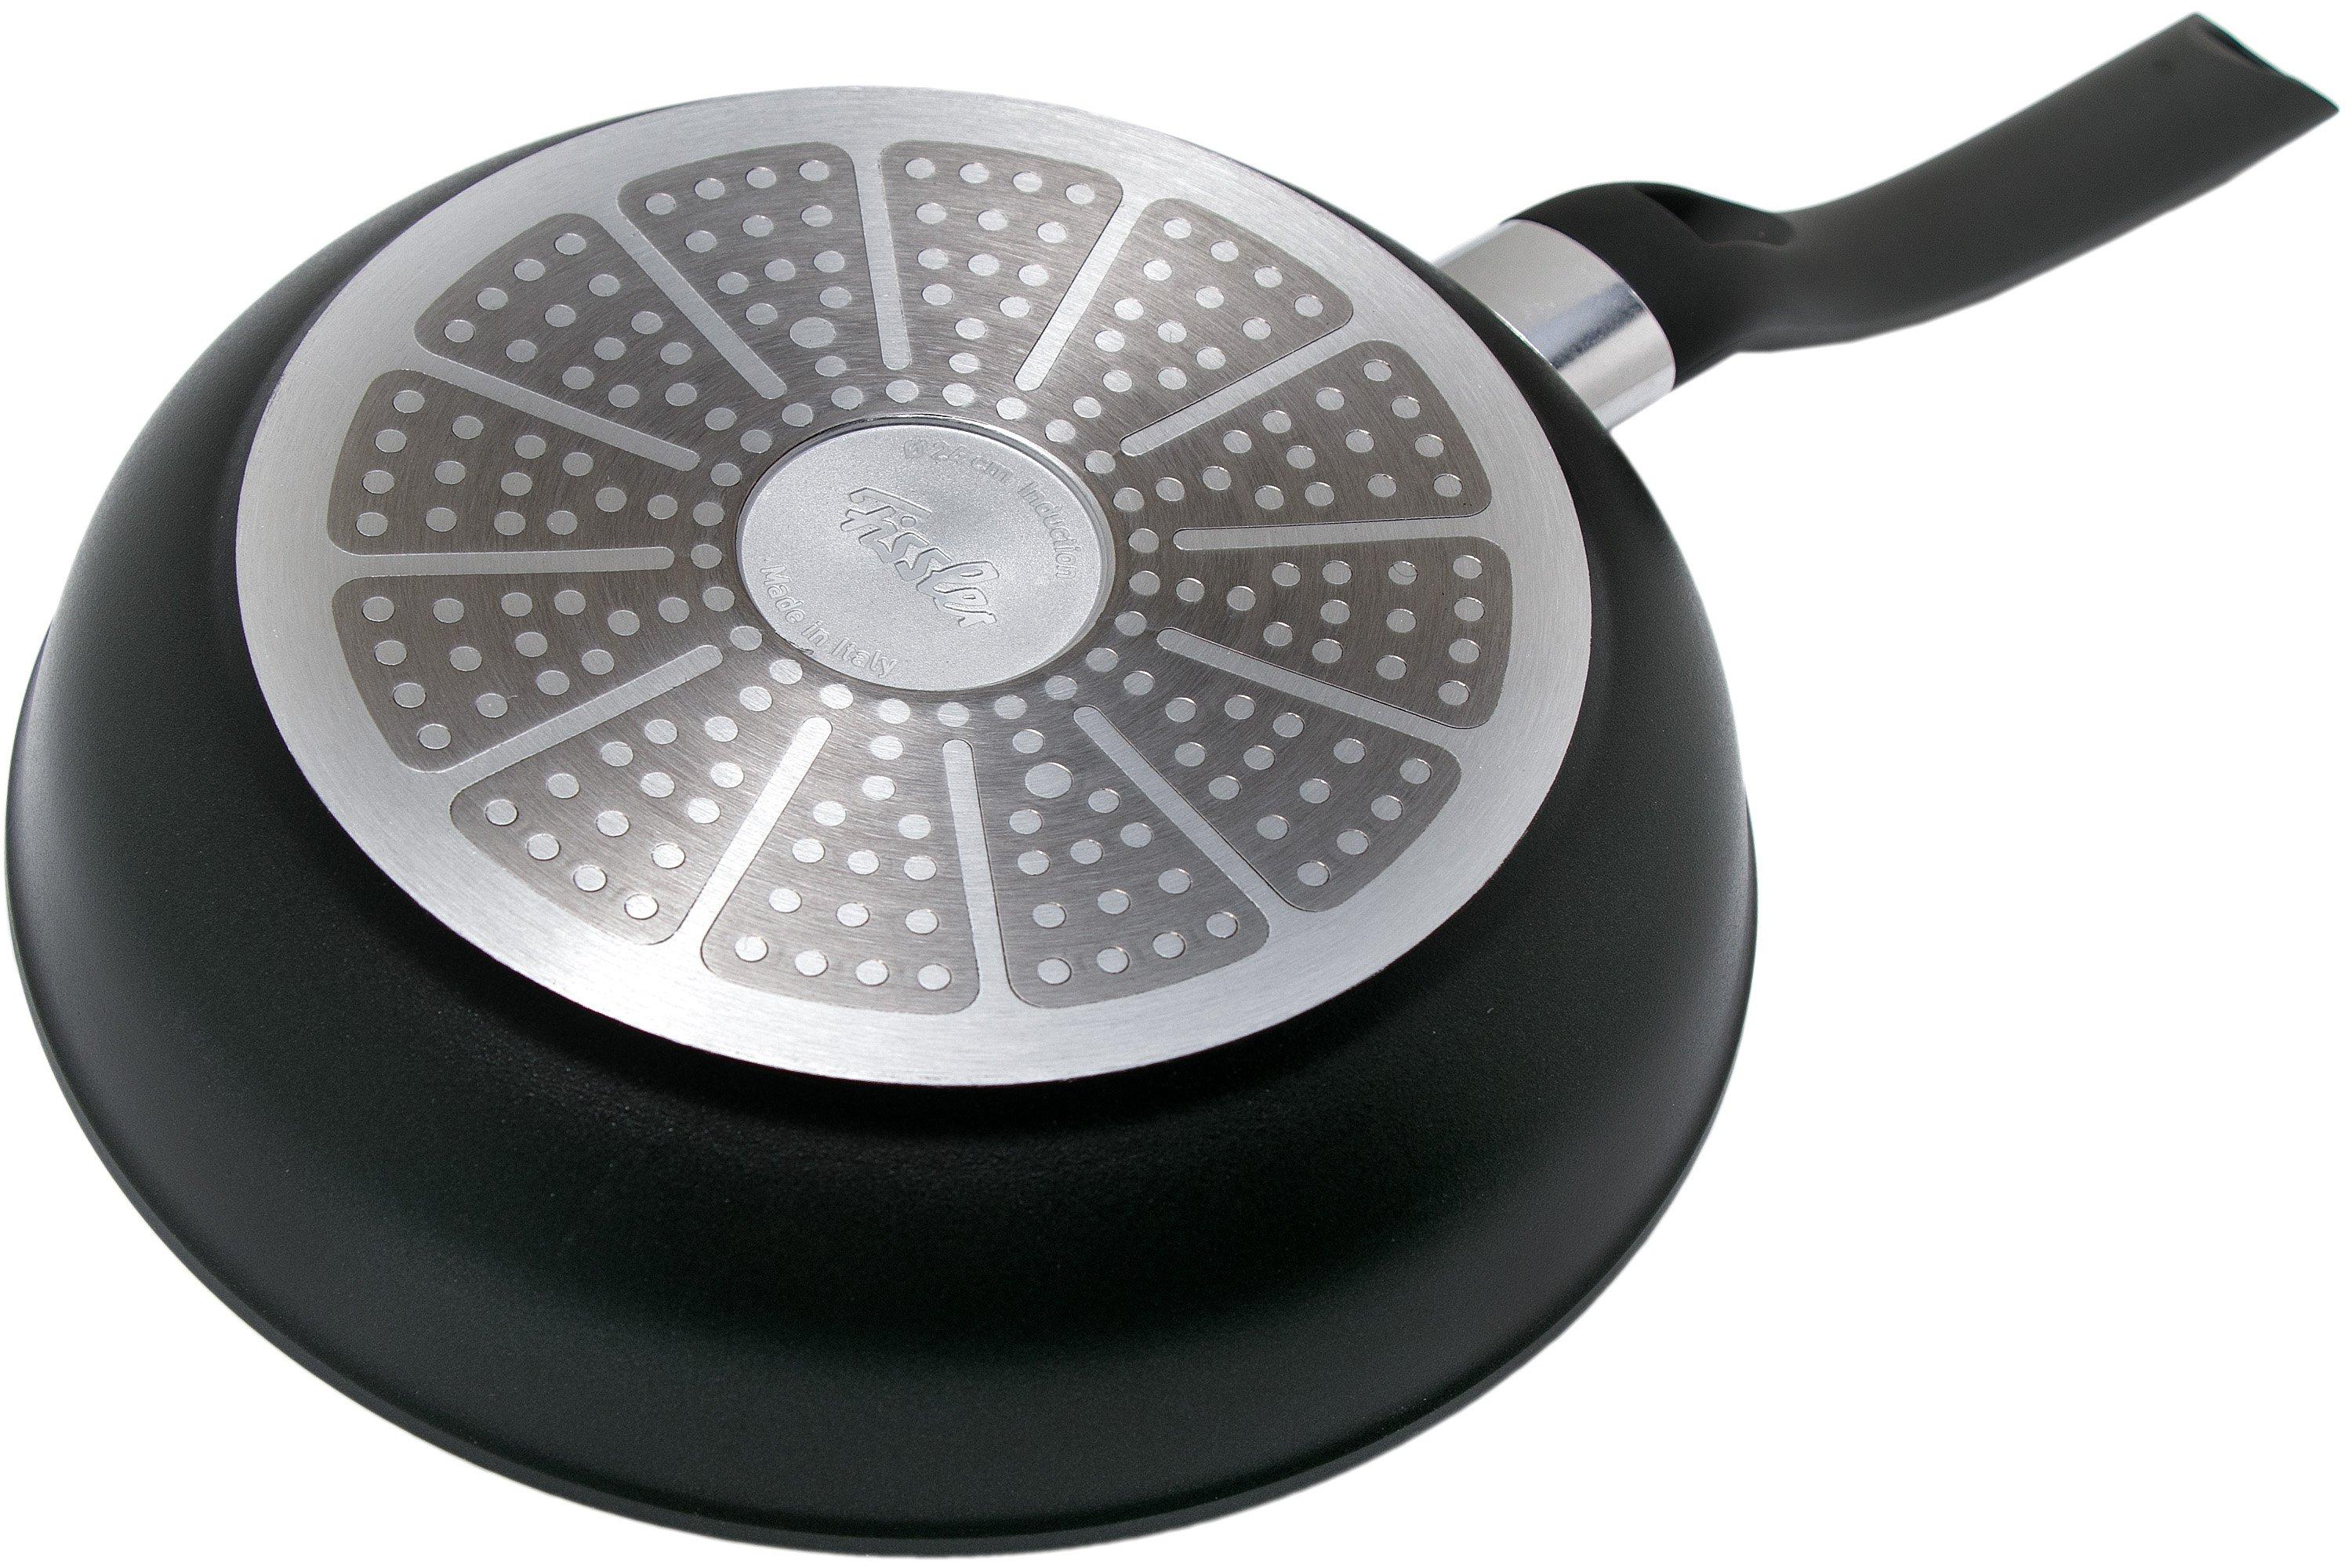 Fissler Cenit Induction 045-301-24-100, 24 cm frying pan | Advantageously  shopping at